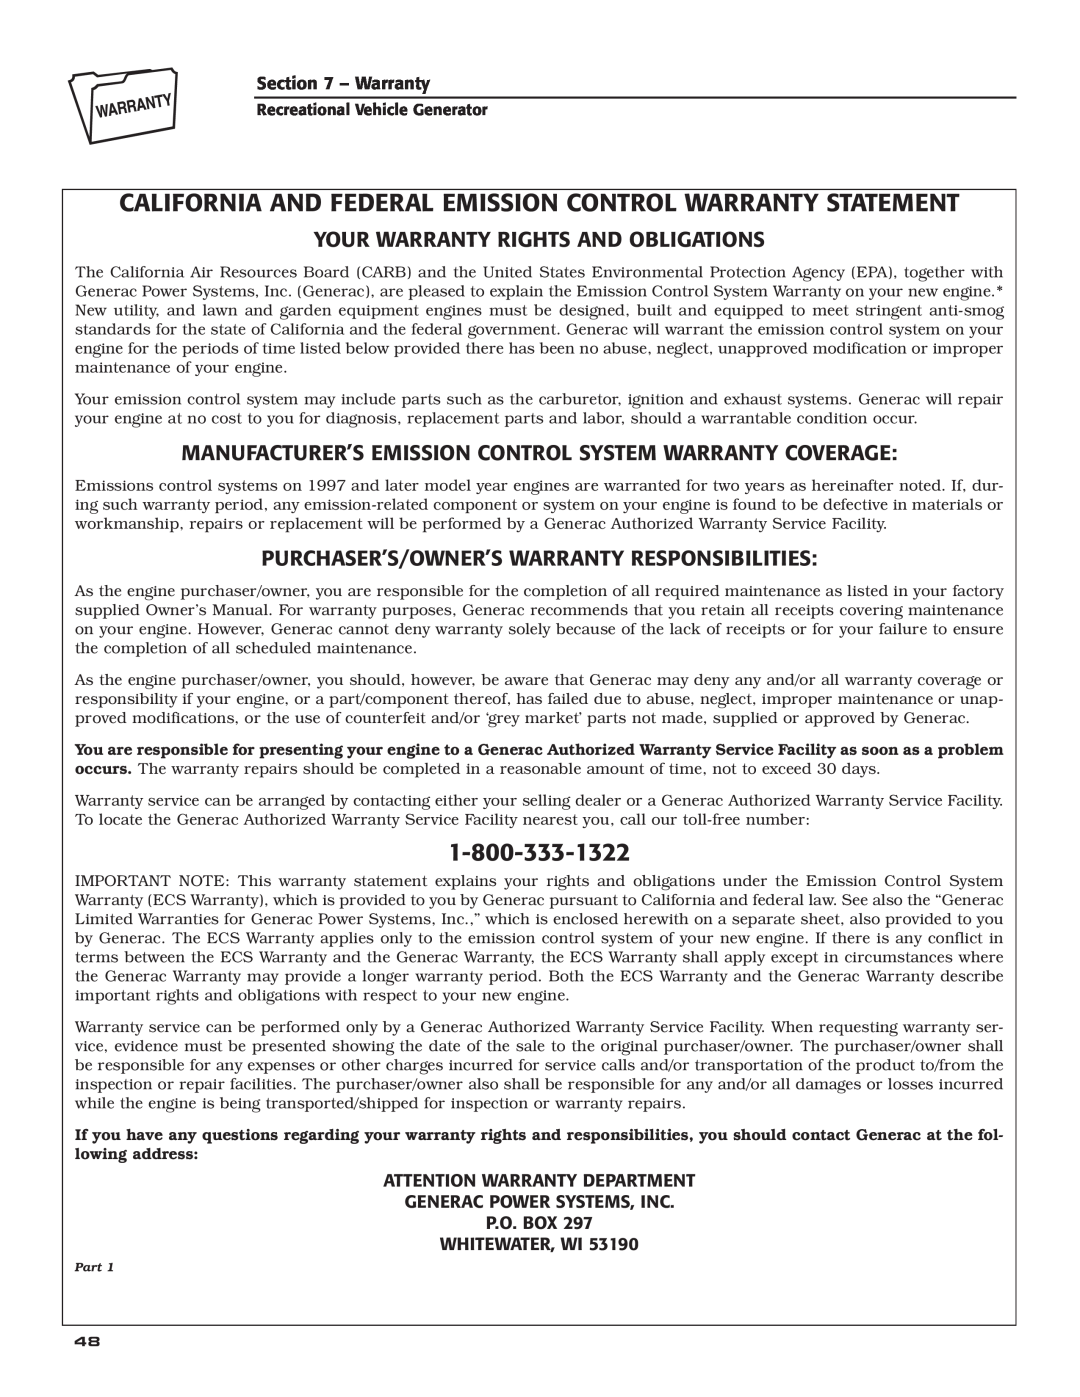 Guardian Technologies 004708-0, 004700-0 California And Federal Emission Control Warranty Statement, Whitewater, Wi 